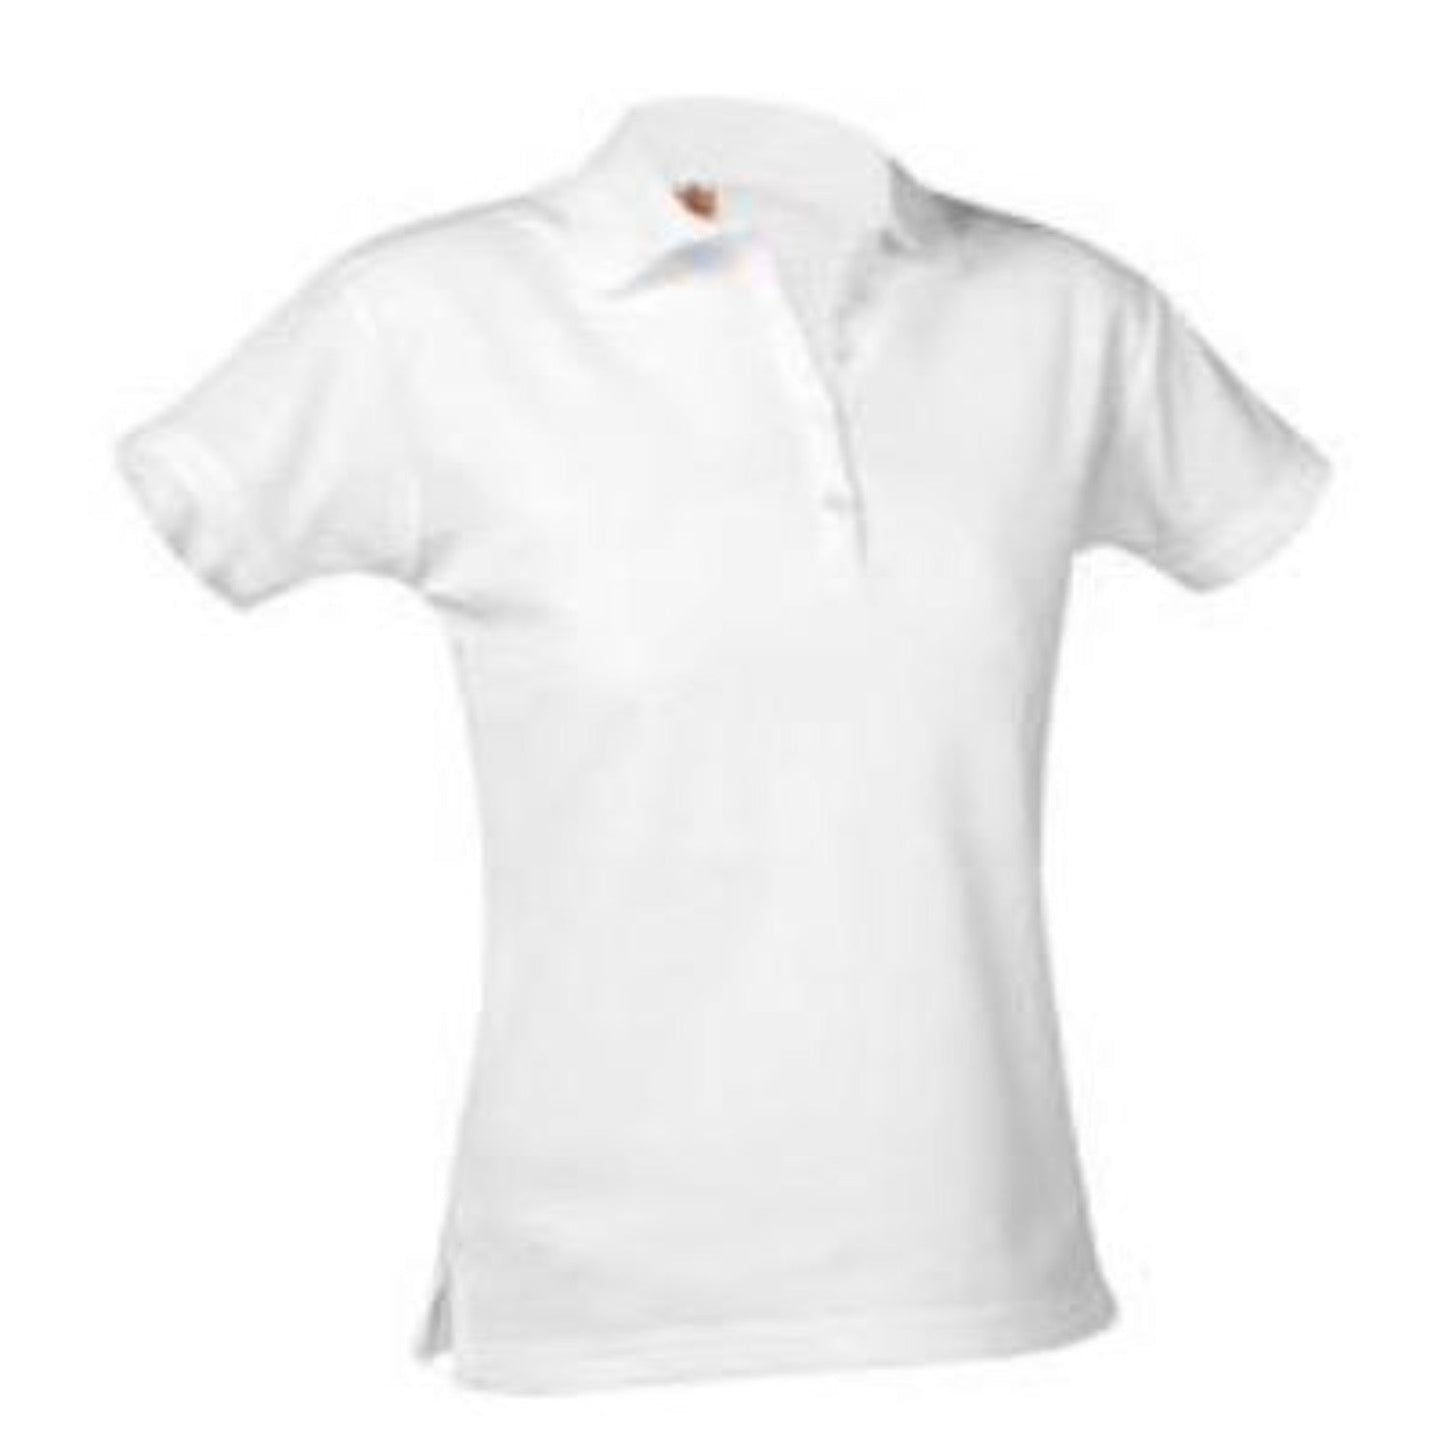 St Thecla Girls Short Sleeve Fitted Pique Knit-White-Logo